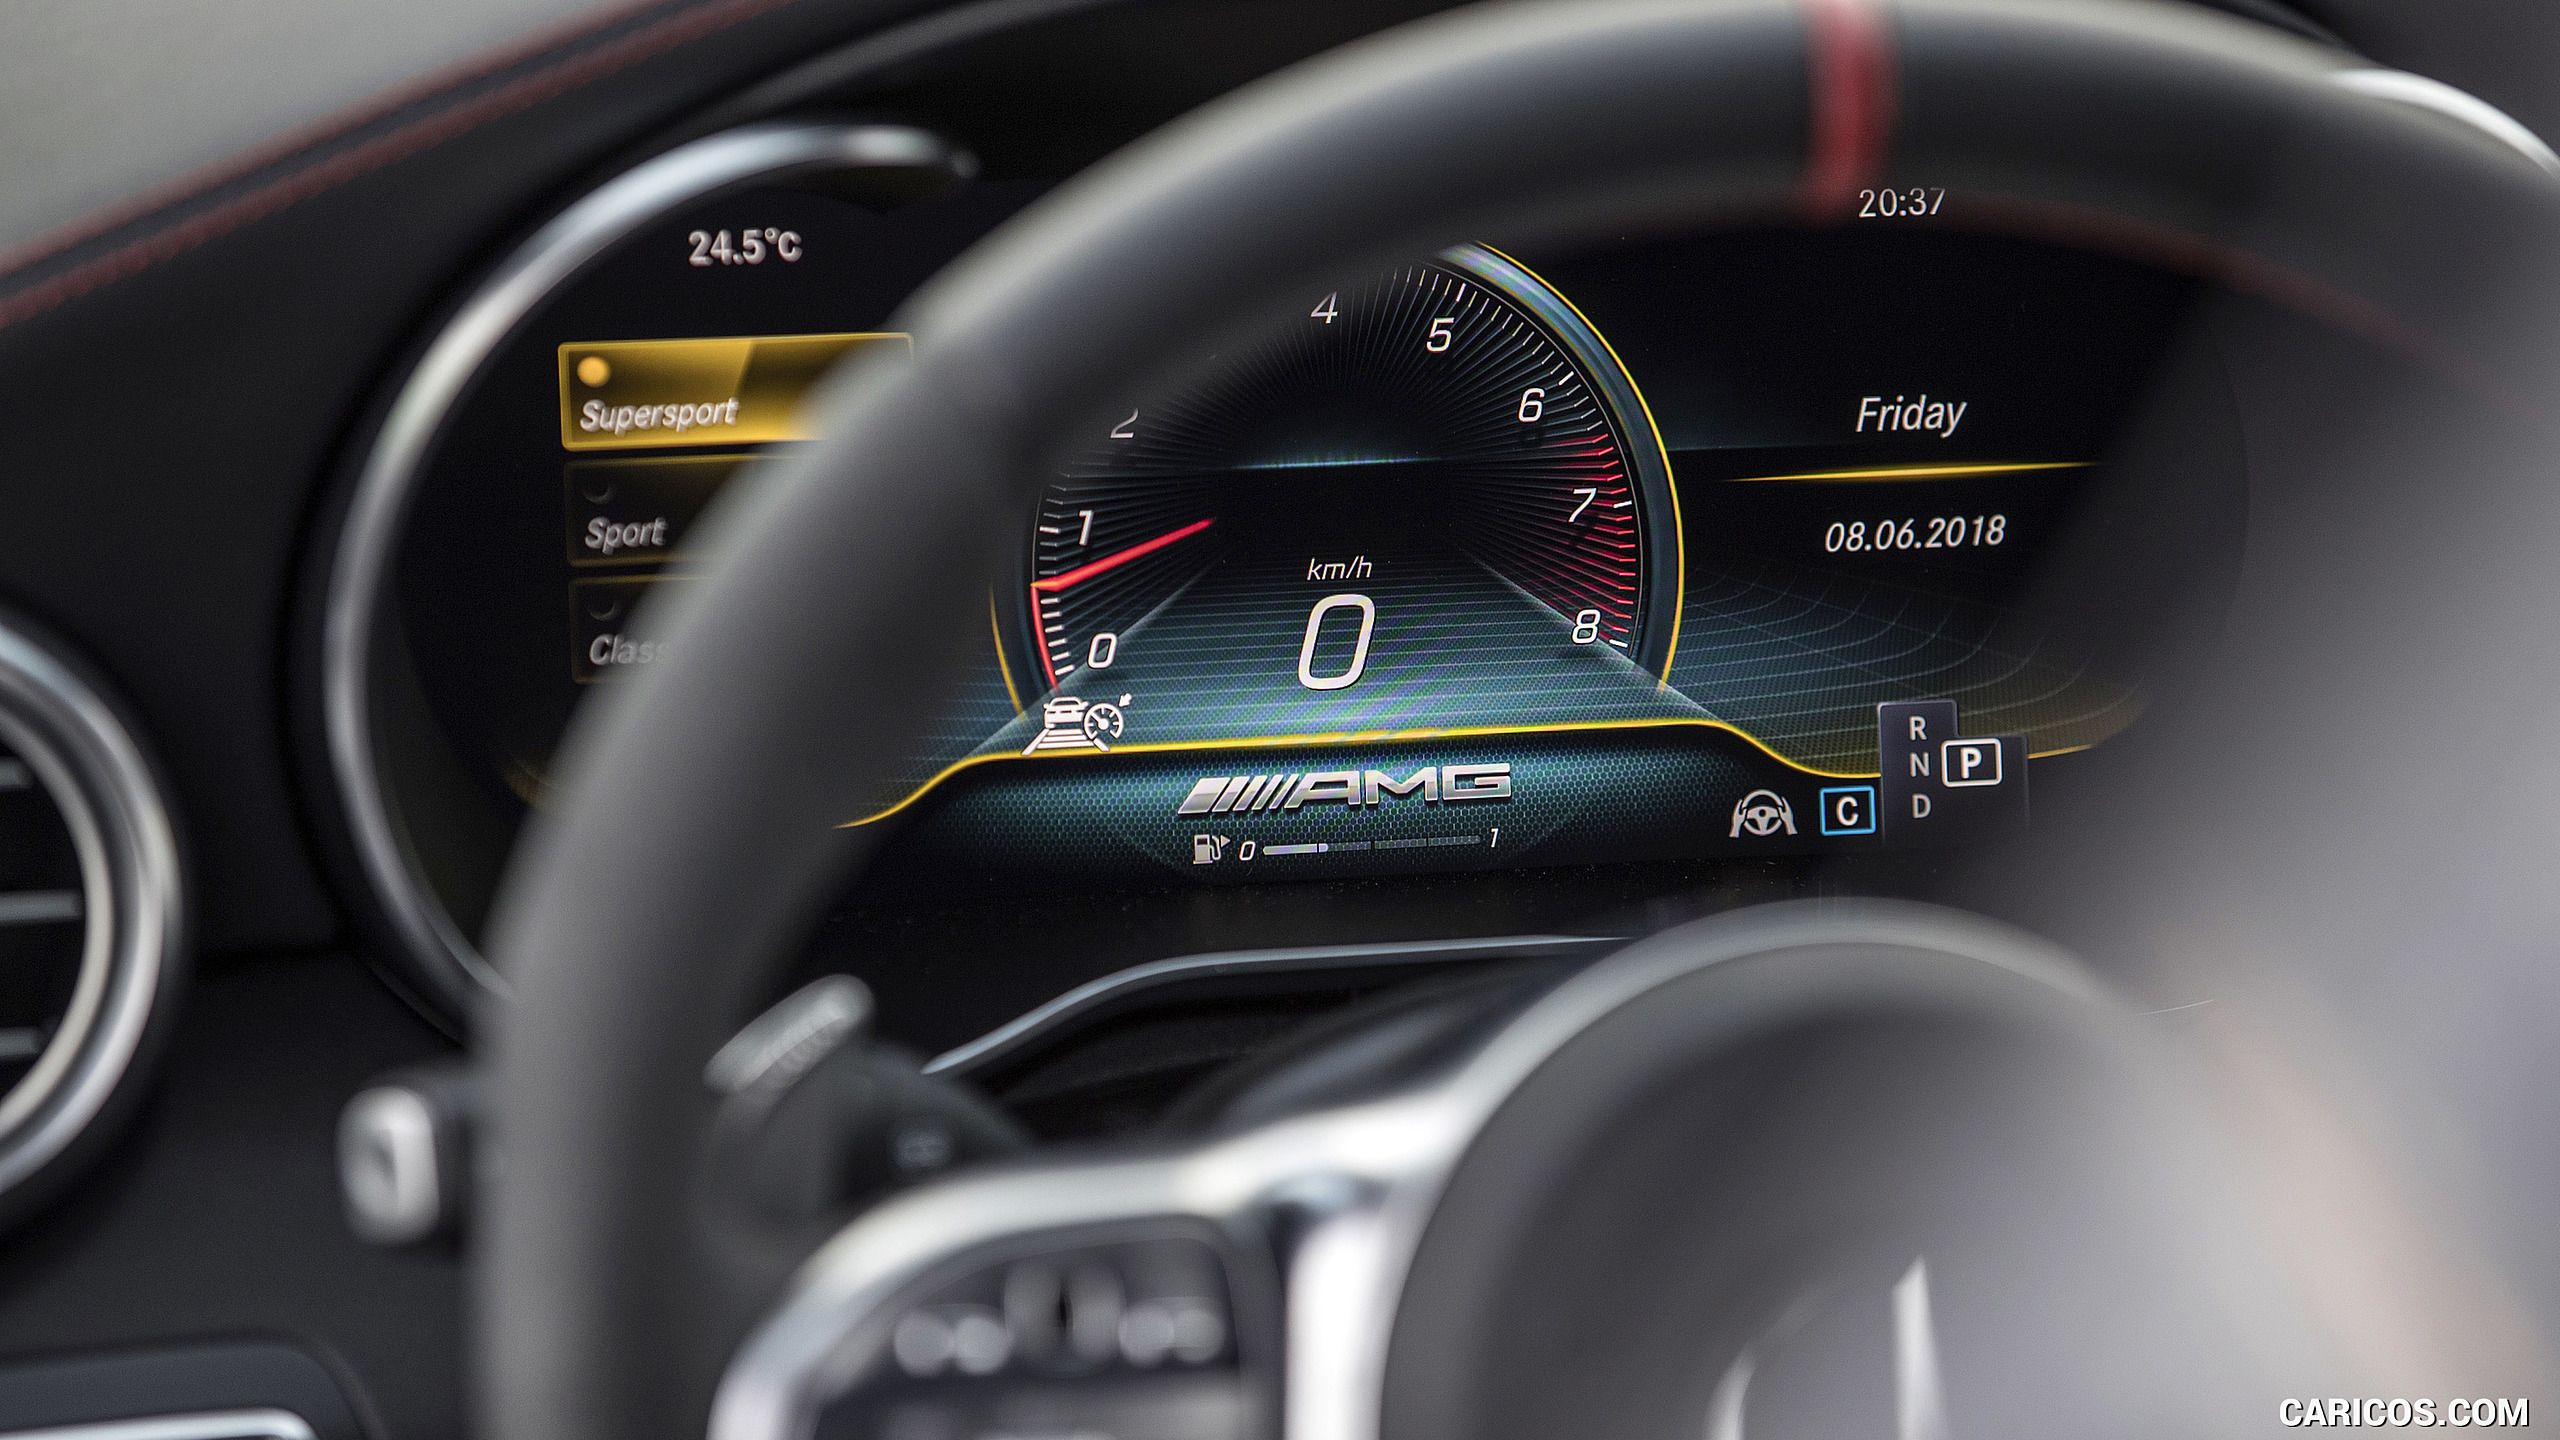 2019 Mercedes-AMG C43 4MATIC Coupe - Interior, Detail, #95 of 184